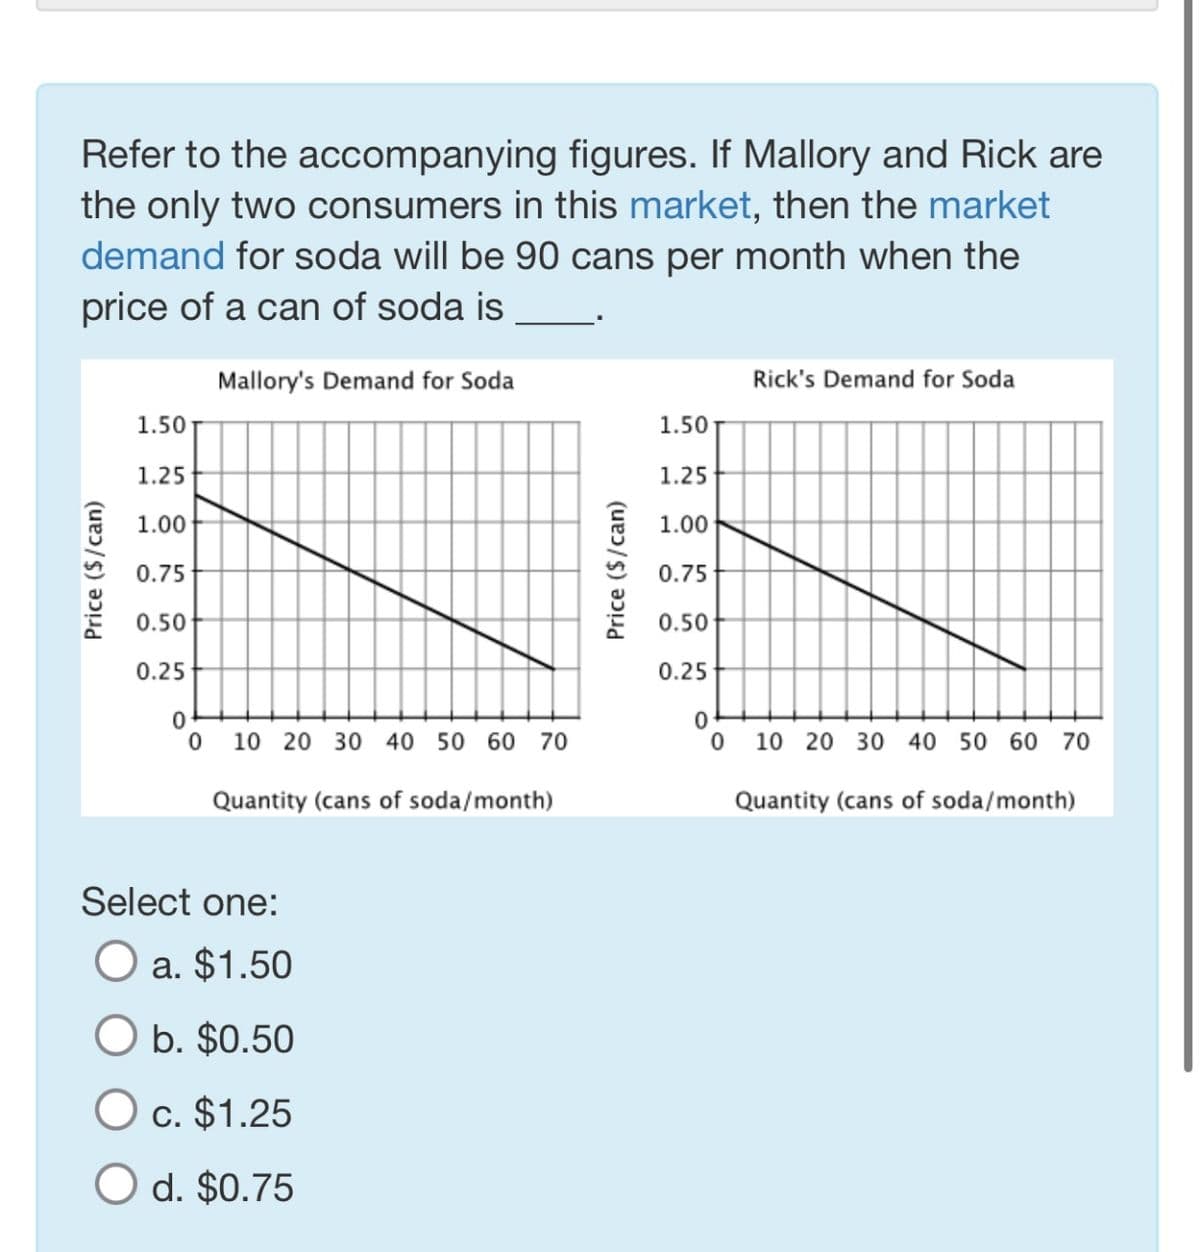 Refer to the accompanying figures. If Mallory and Rick are
the only two consumers in this market, then the market
demand for soda will be 90 cans per month when the
price of a can of soda is
Mallory's Demand for Soda
Price ($/can)
1.501
1.25
1.00
0.75
0.50
0.25
0
0
10 20 30 40 50 60 70
Quantity (cans of soda/month)
Select one:
O a. $1.50
O b. $0.50
O c. $1.25
O d. $0.75
Price ($/can)
1.50
1.25
1.00
0.75
0.50
0.25
0
0
Rick's Demand for Soda
10 20 30 40 50 60 70
Quantity (cans of soda/month)